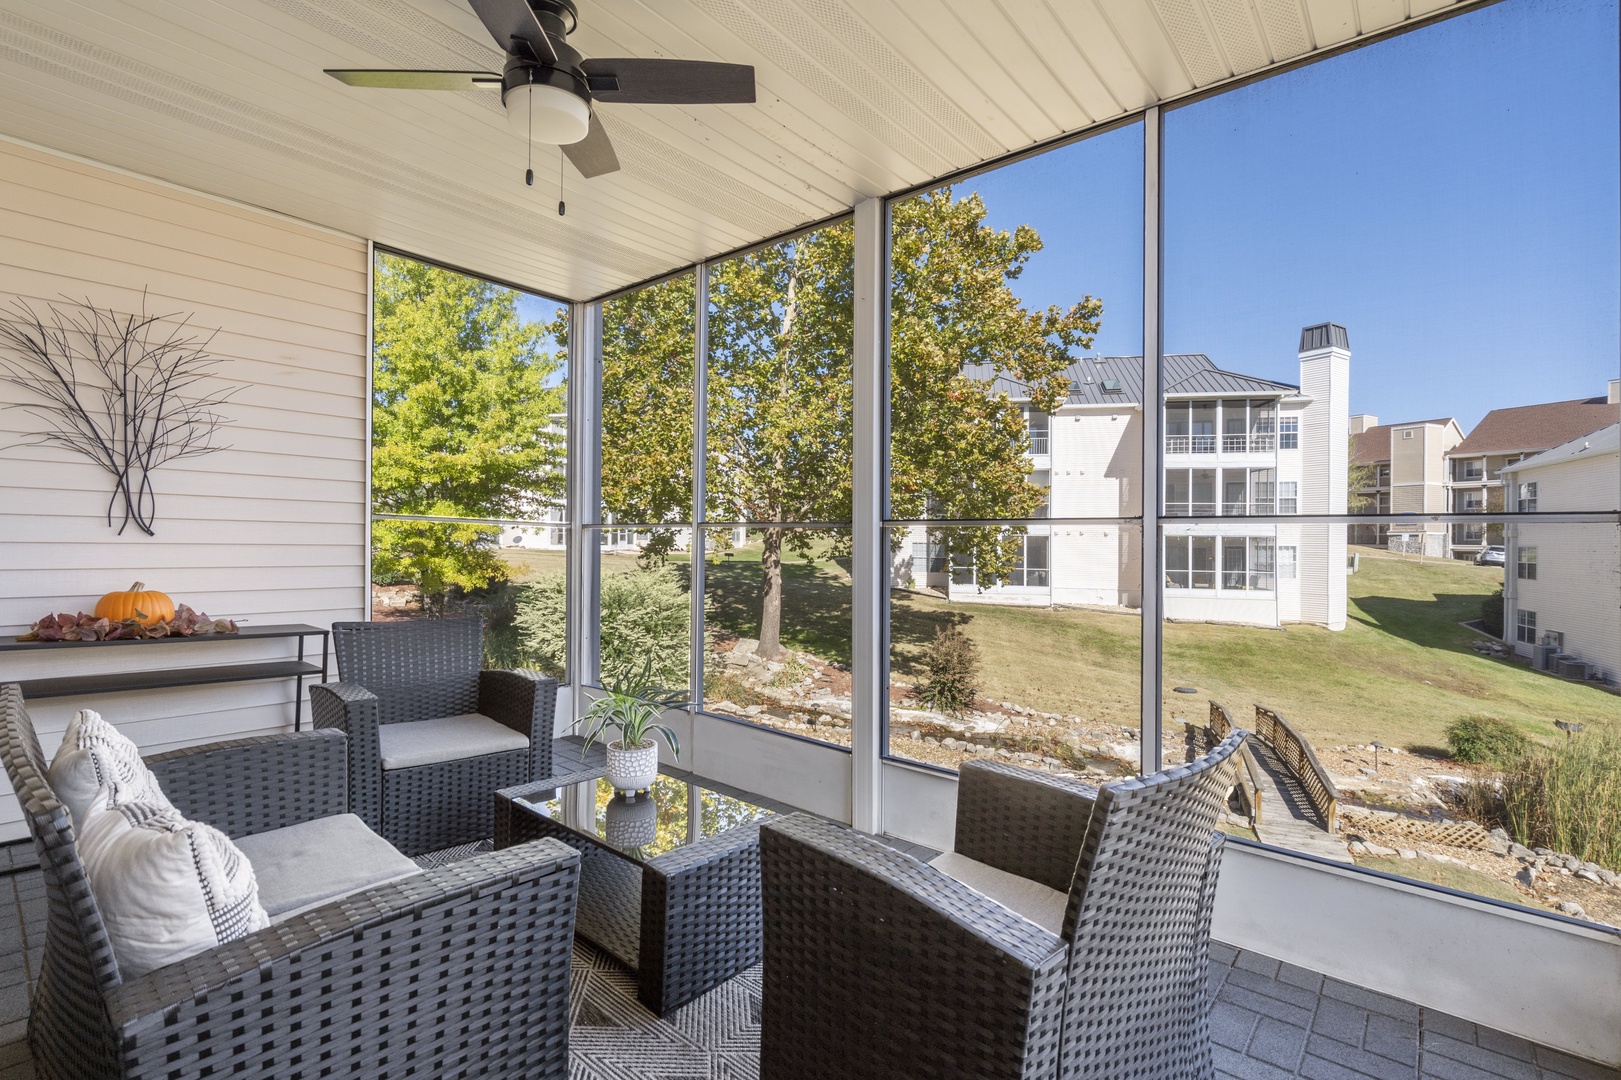 Covered and screened in patio to enjoy relaxing outdoors